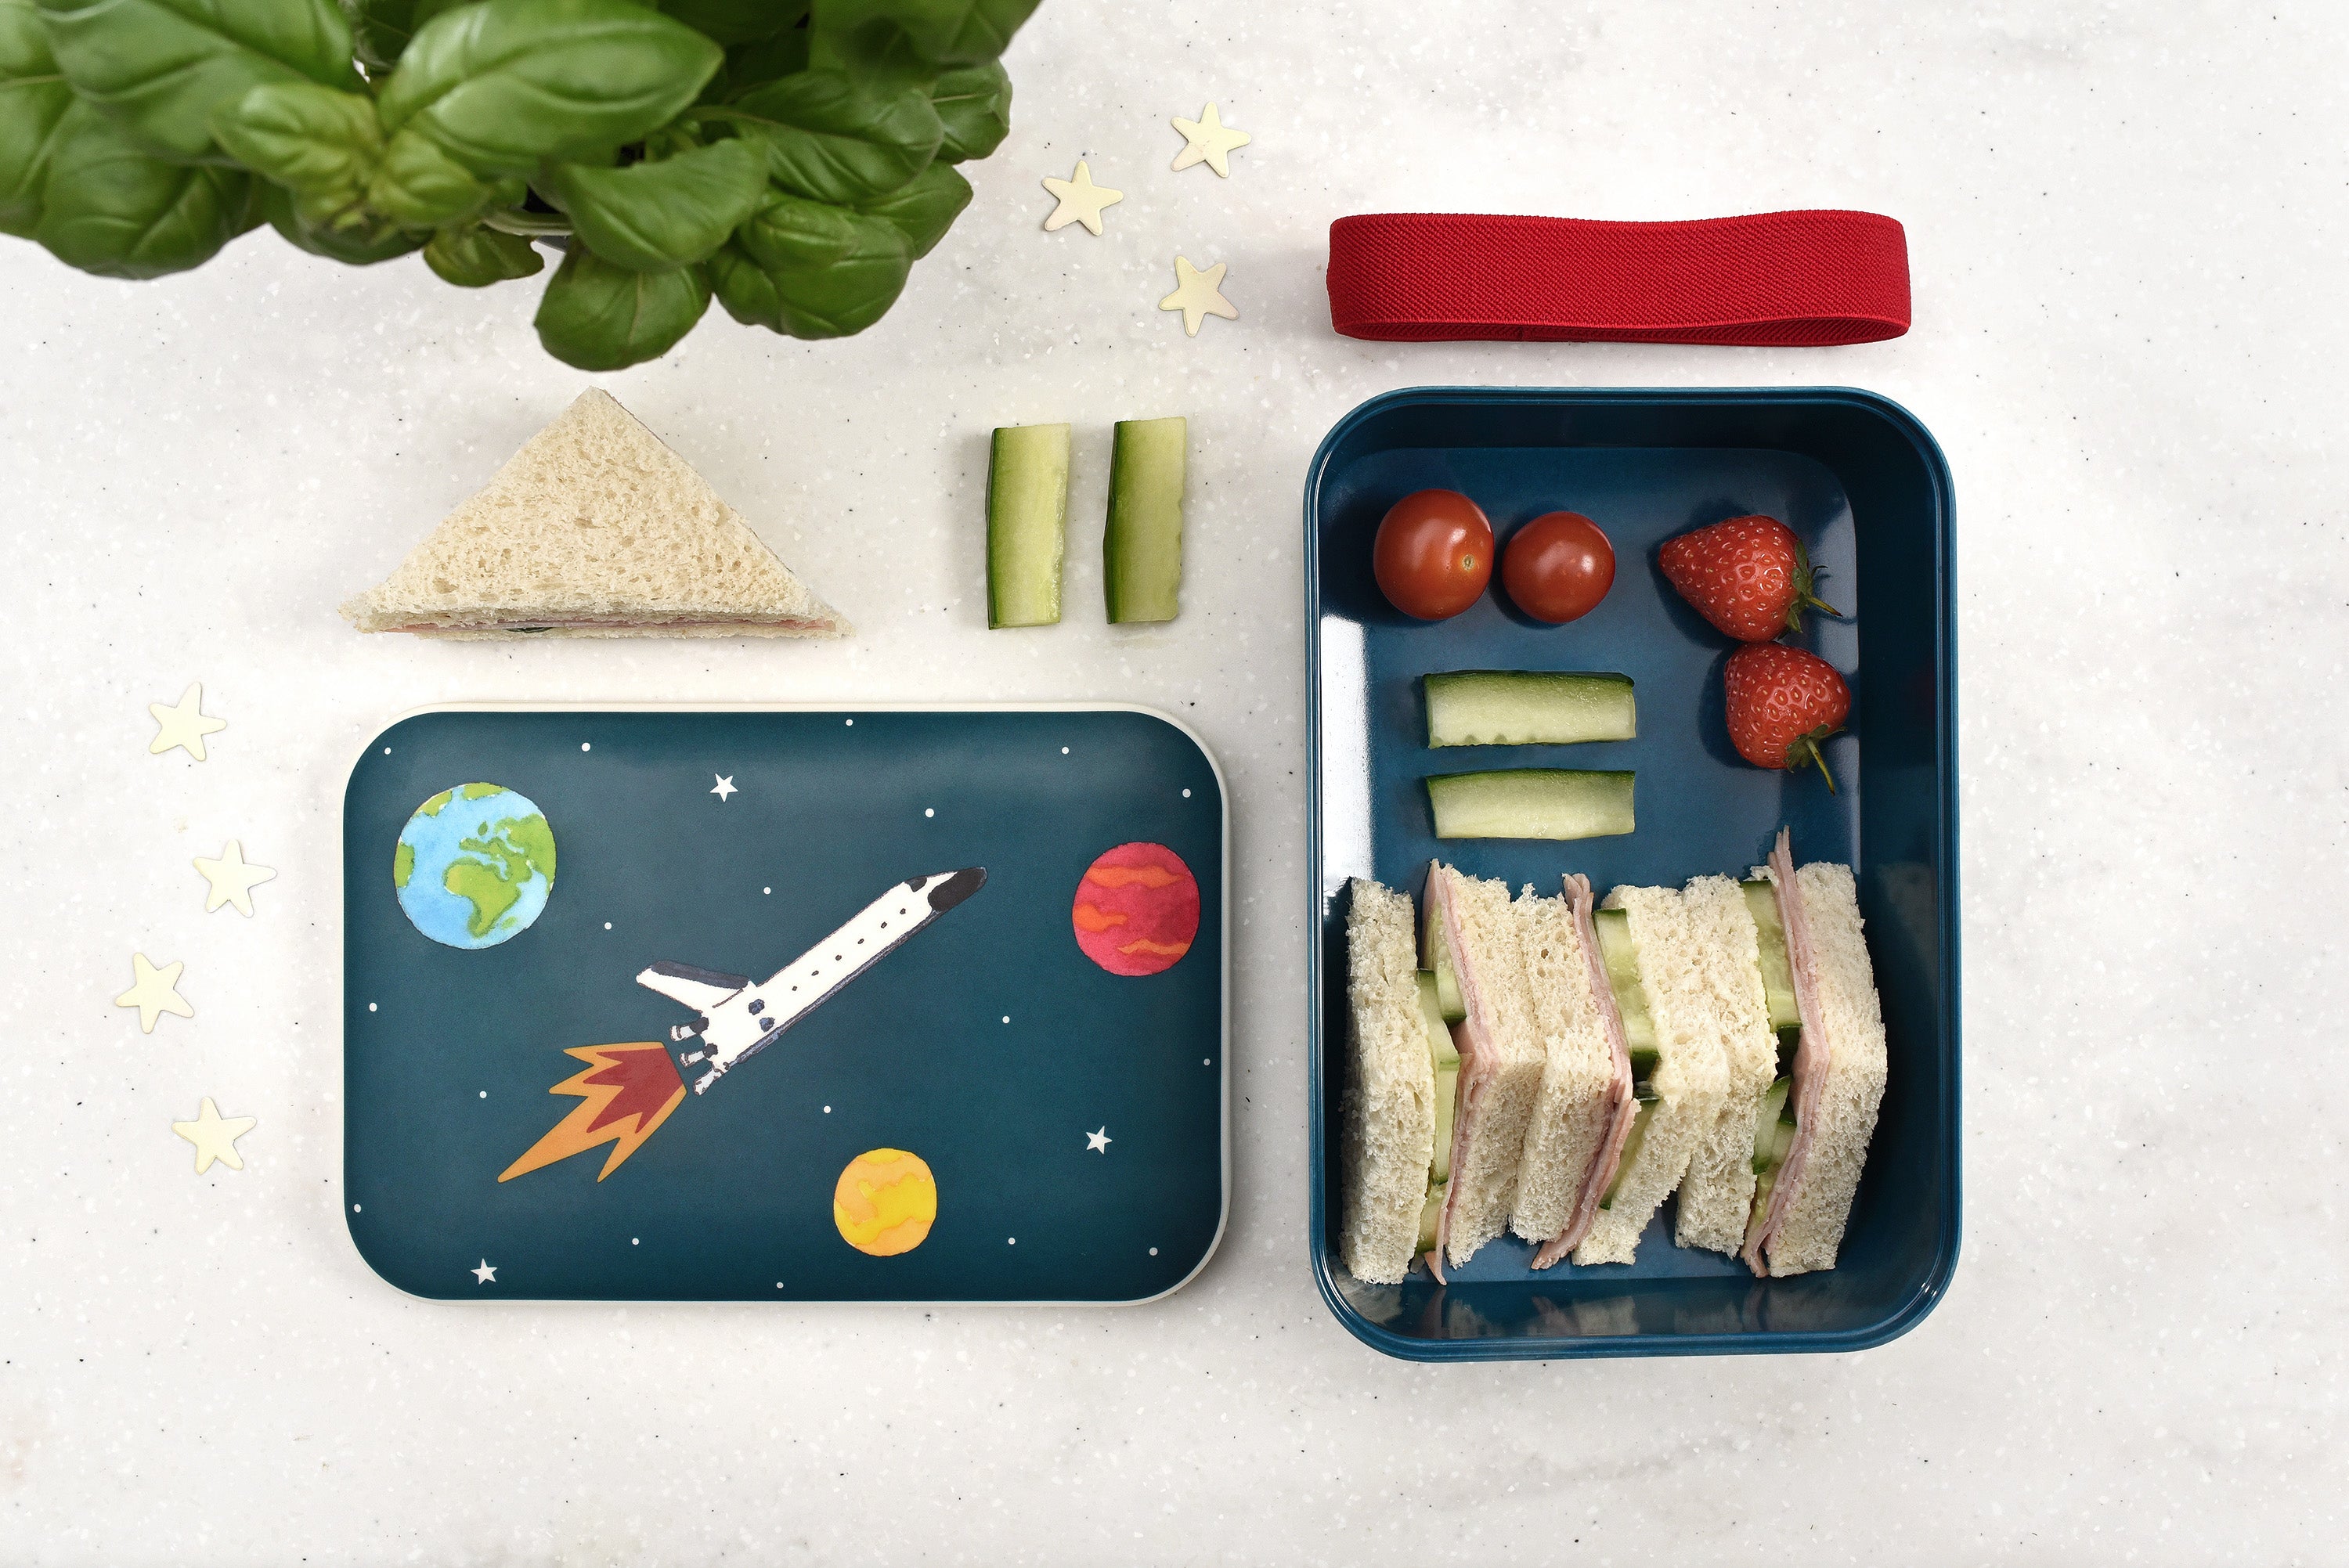 Picnicware by Sophie Allport